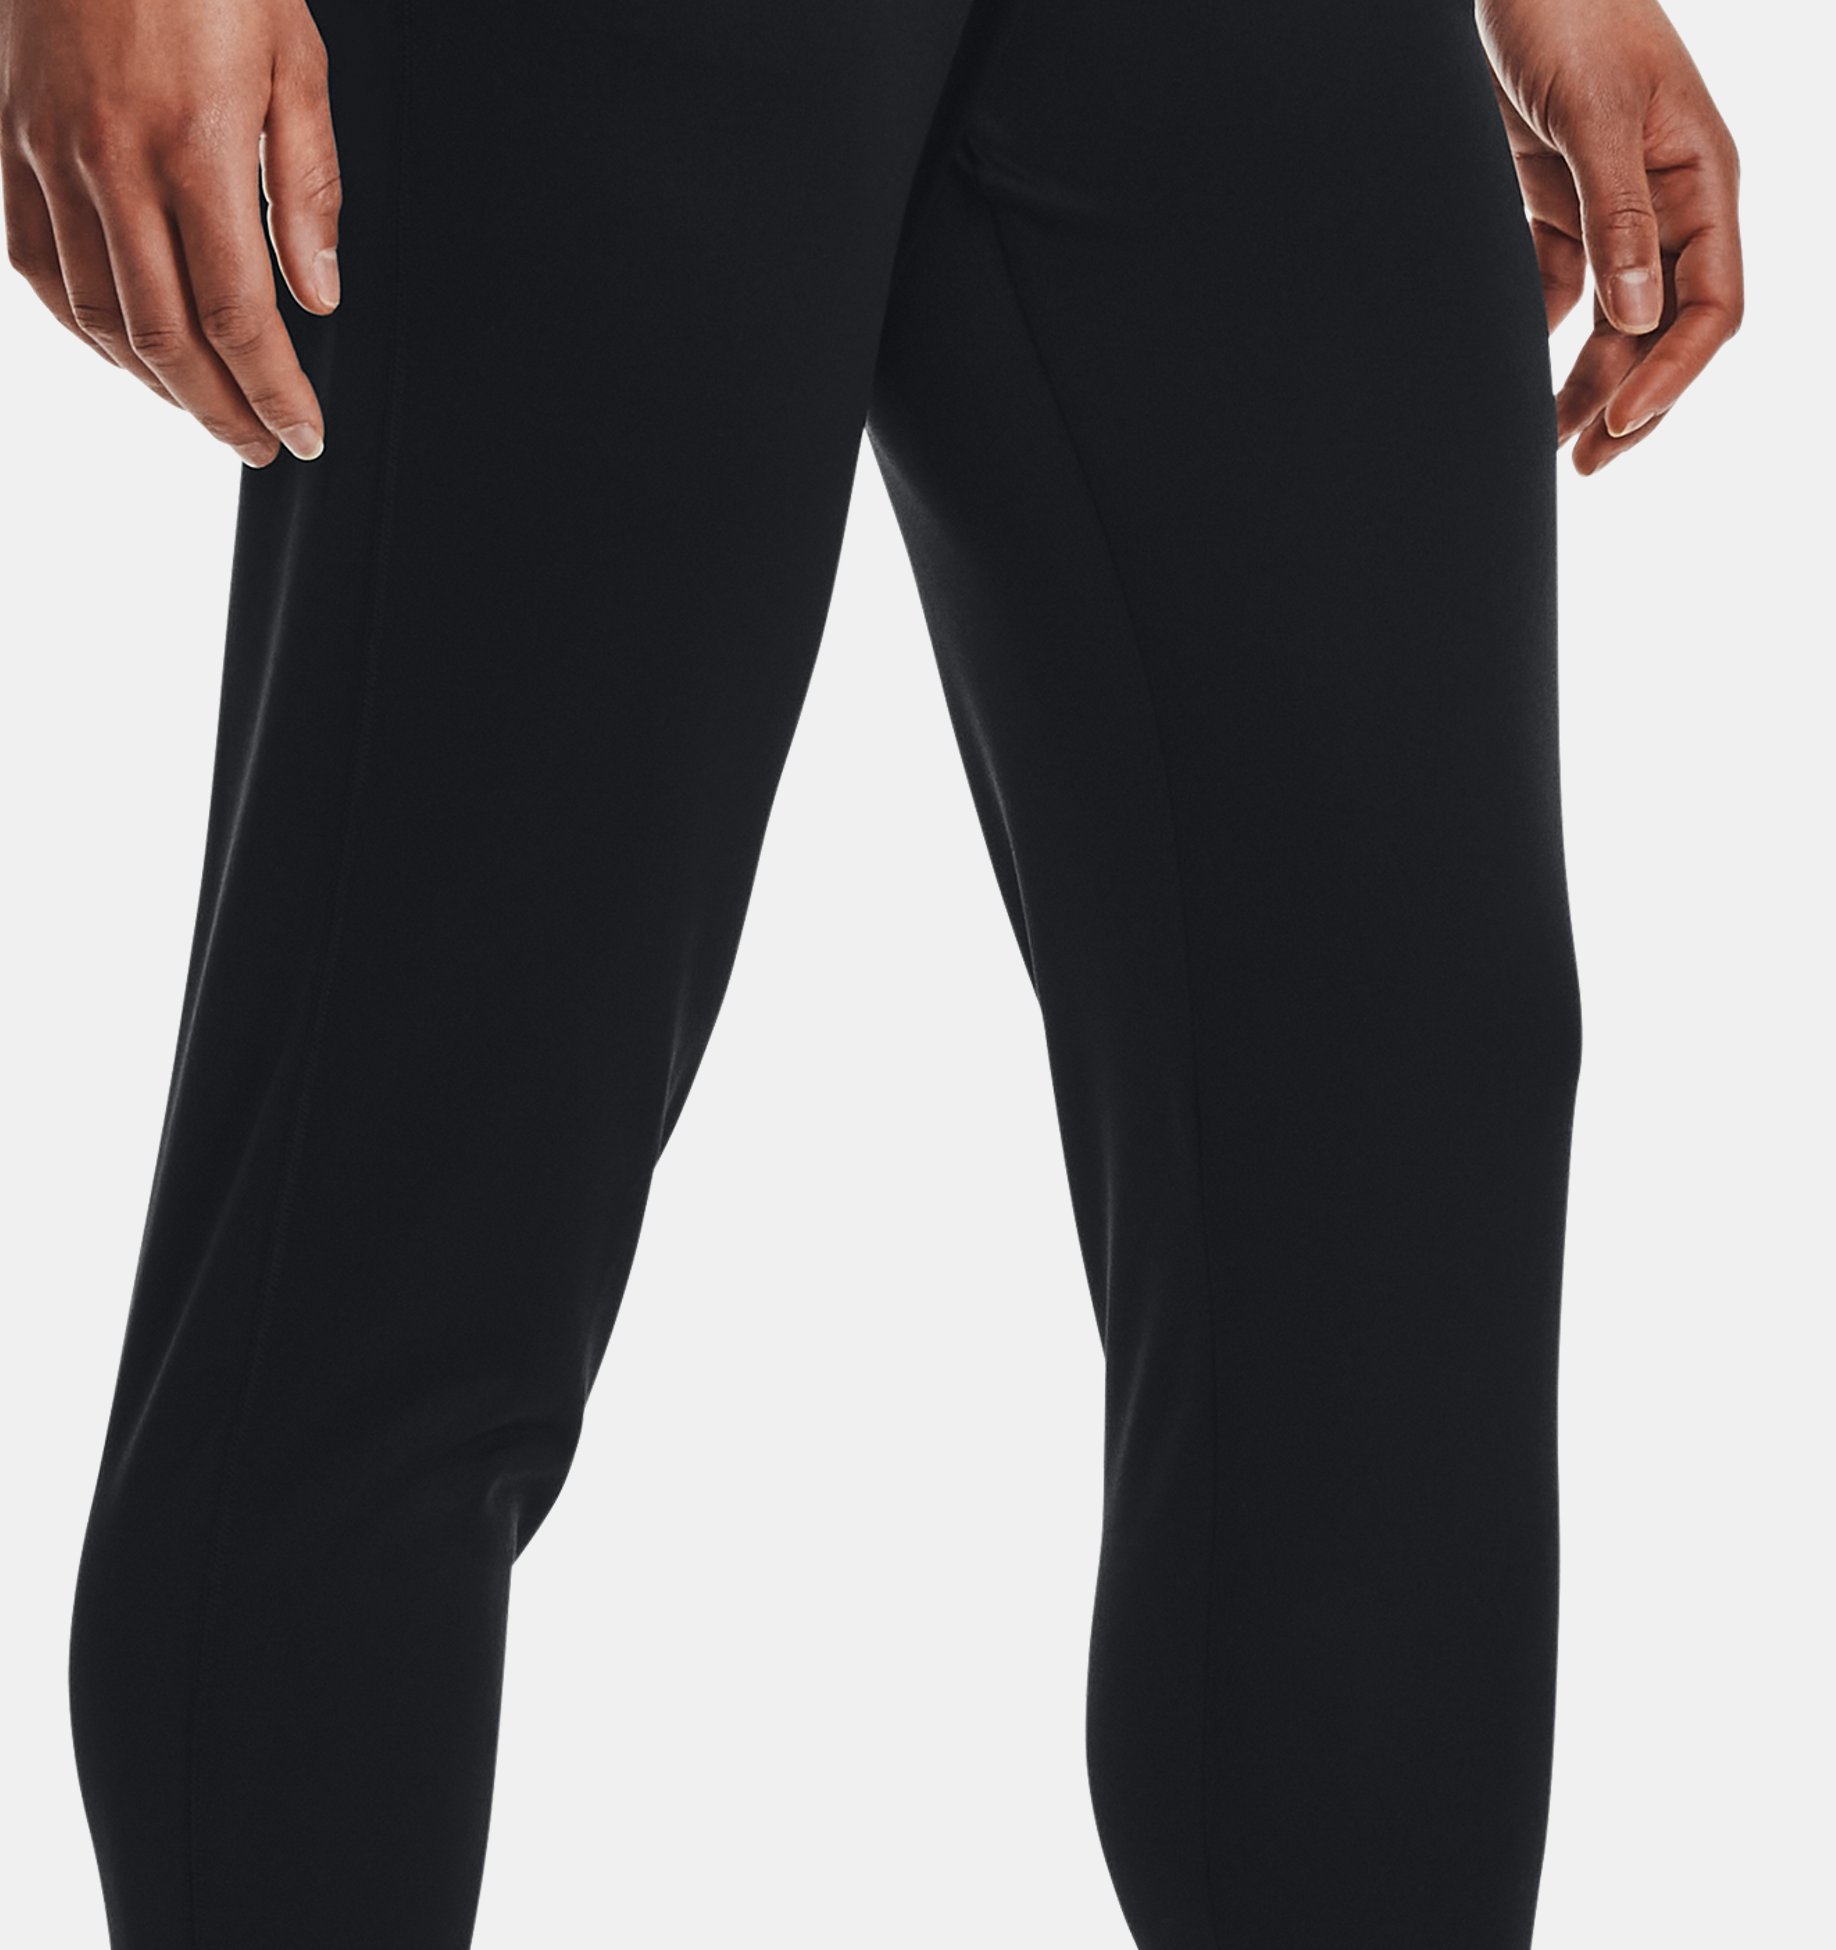 Under Armour Tech Heat Gear Pants Loose Fit NEW